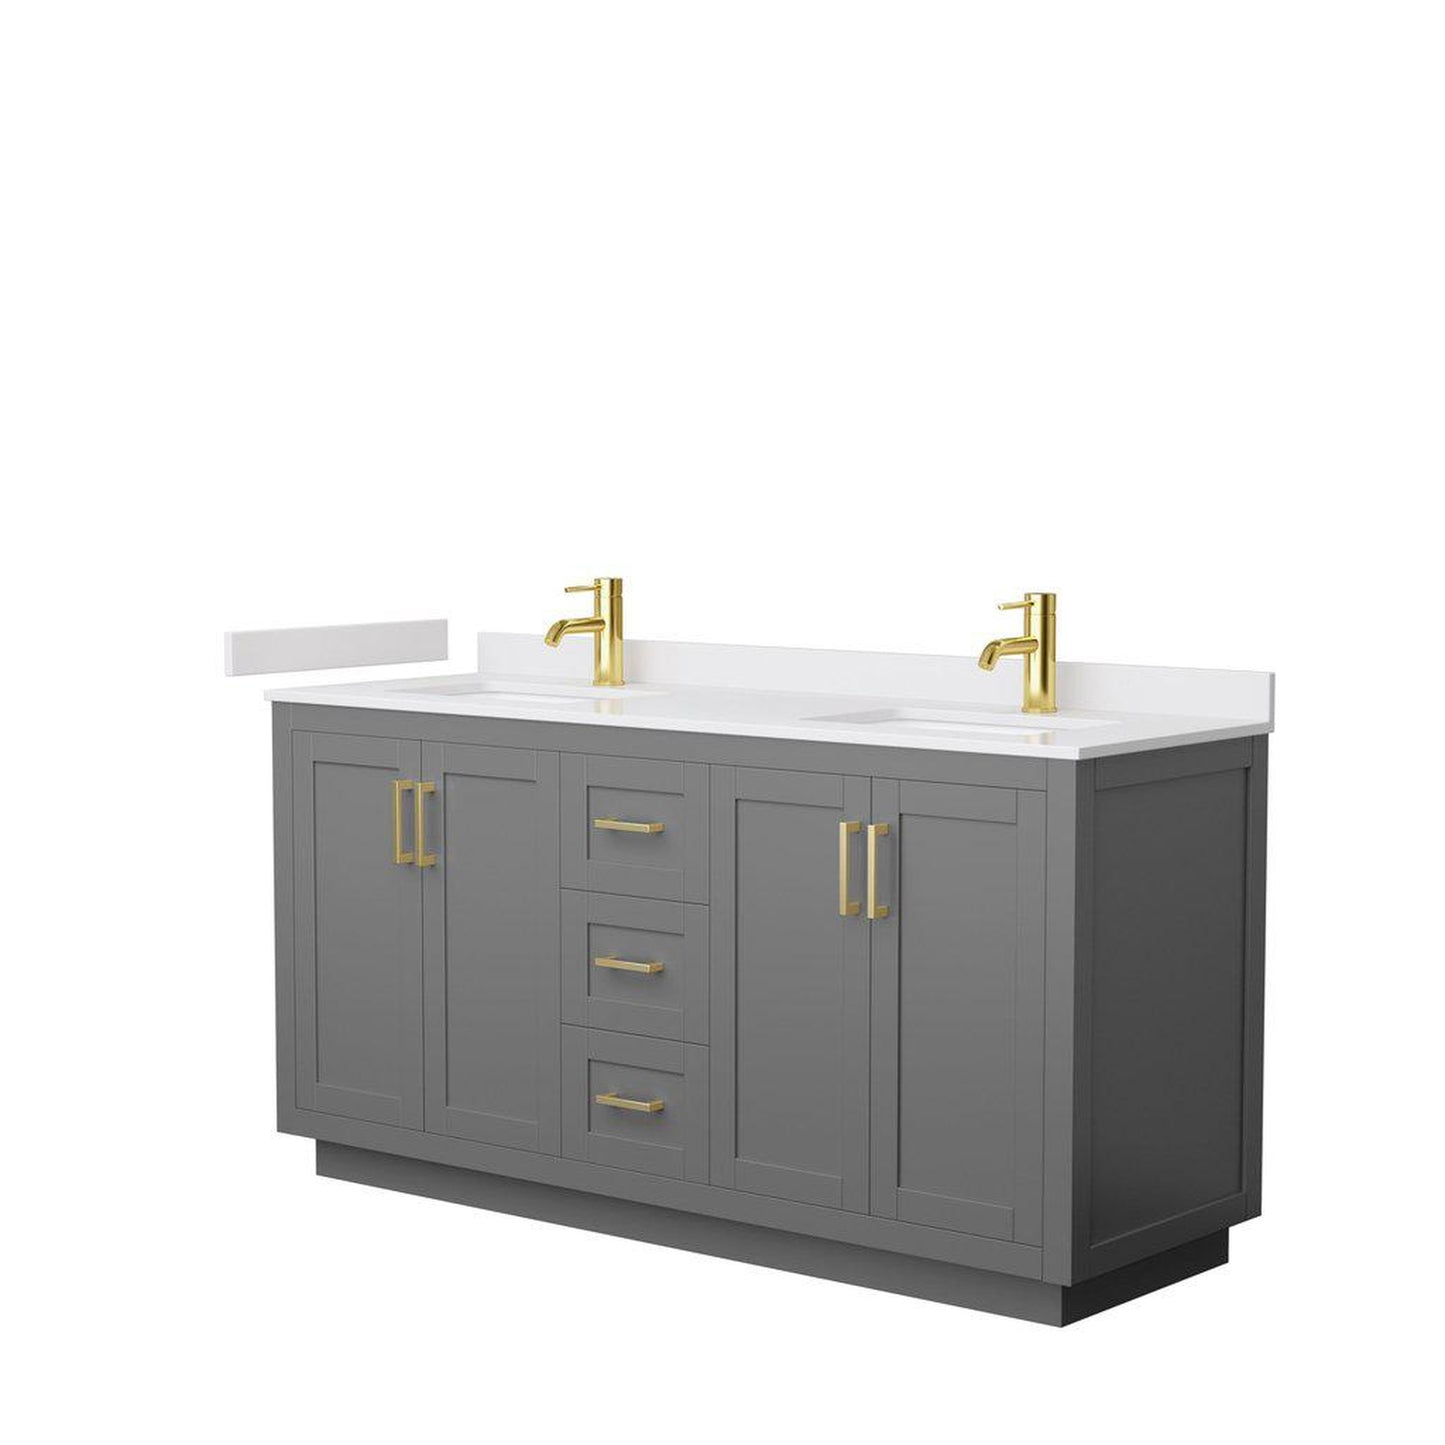 Wyndham Collection Miranda 66" Double Bathroom Dark Gray Vanity Set With White Cultured Marble Countertop, Undermount Square Sink, And Brushed Gold Trim